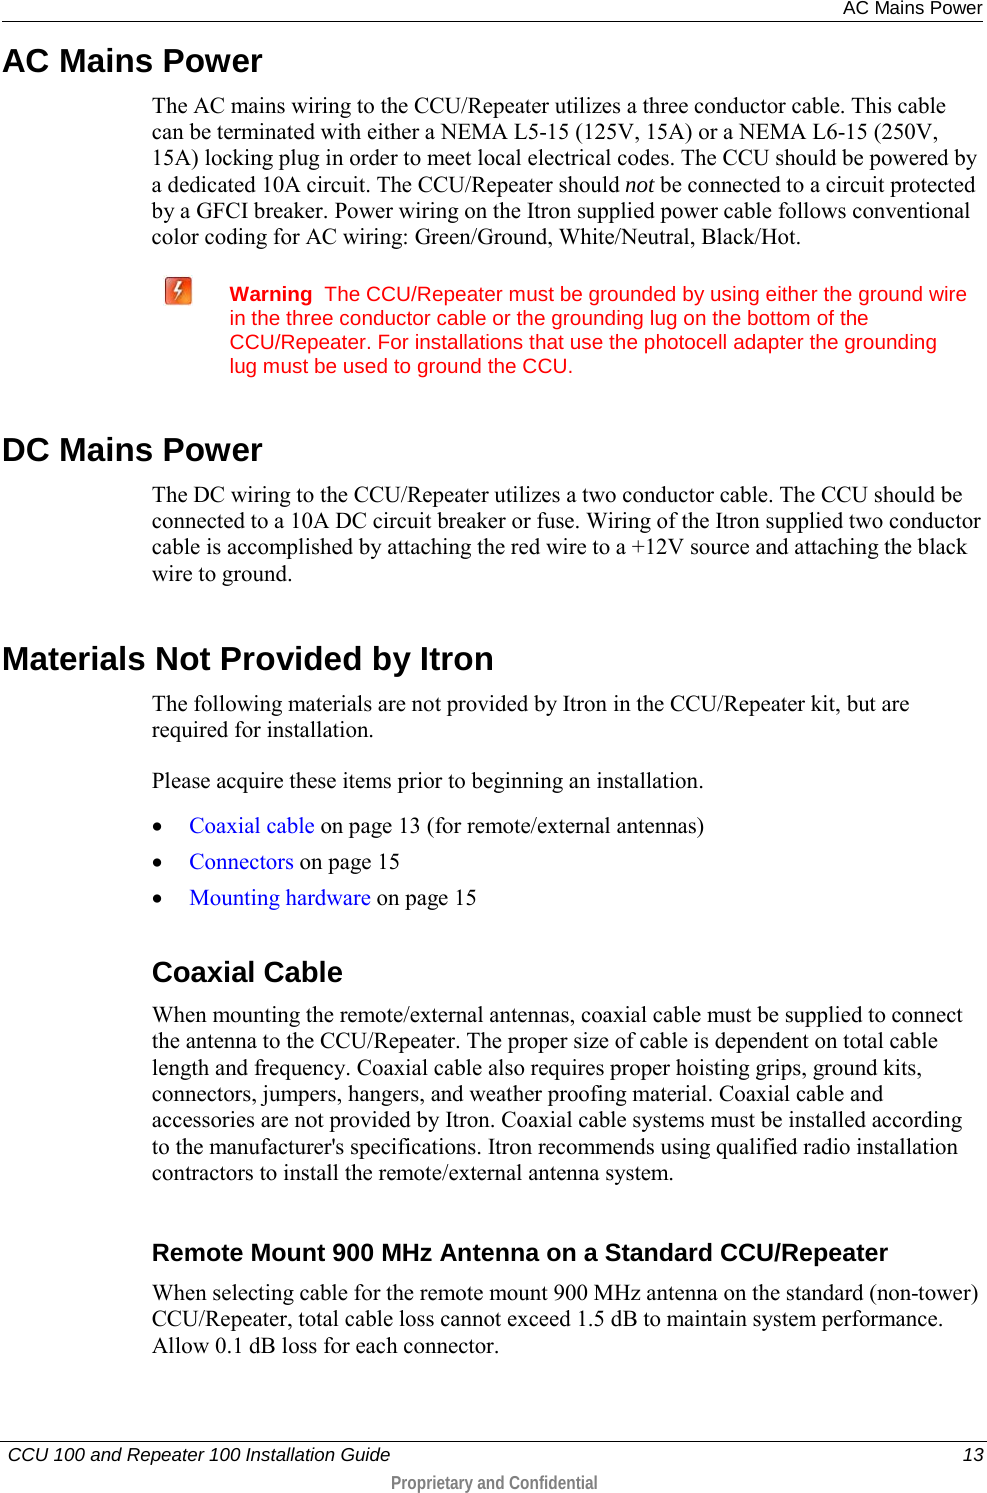  AC Mains Power   CCU 100 and Repeater 100 Installation Guide    13  Proprietary and Confidential  AC Mains Power The AC mains wiring to the CCU/Repeater utilizes a three conductor cable. This cable can be terminated with either a NEMA L5-15 (125V, 15A) or a NEMA L6-15 (250V, 15A) locking plug in order to meet local electrical codes. The CCU should be powered by a dedicated 10A circuit. The CCU/Repeater should not be connected to a circuit protected by a GFCI breaker. Power wiring on the Itron supplied power cable follows conventional color coding for AC wiring: Green/Ground, White/Neutral, Black/Hot.   Warning  The CCU/Repeater must be grounded by using either the ground wire in the three conductor cable or the grounding lug on the bottom of the CCU/Repeater. For installations that use the photocell adapter the grounding lug must be used to ground the CCU.  DC Mains Power The DC wiring to the CCU/Repeater utilizes a two conductor cable. The CCU should be connected to a 10A DC circuit breaker or fuse. Wiring of the Itron supplied two conductor cable is accomplished by attaching the red wire to a +12V source and attaching the black wire to ground.  Materials Not Provided by Itron The following materials are not provided by Itron in the CCU/Repeater kit, but are required for installation.  Please acquire these items prior to beginning an installation.  • Coaxial cable on page 13 (for remote/external antennas) • Connectors on page 15 • Mounting hardware on page 15  Coaxial Cable When mounting the remote/external antennas, coaxial cable must be supplied to connect the antenna to the CCU/Repeater. The proper size of cable is dependent on total cable length and frequency. Coaxial cable also requires proper hoisting grips, ground kits, connectors, jumpers, hangers, and weather proofing material. Coaxial cable and accessories are not provided by Itron. Coaxial cable systems must be installed according to the manufacturer&apos;s specifications. Itron recommends using qualified radio installation contractors to install the remote/external antenna system.   Remote Mount 900 MHz Antenna on a Standard CCU/Repeater When selecting cable for the remote mount 900 MHz antenna on the standard (non-tower) CCU/Repeater, total cable loss cannot exceed 1.5 dB to maintain system performance. Allow 0.1 dB loss for each connector.  